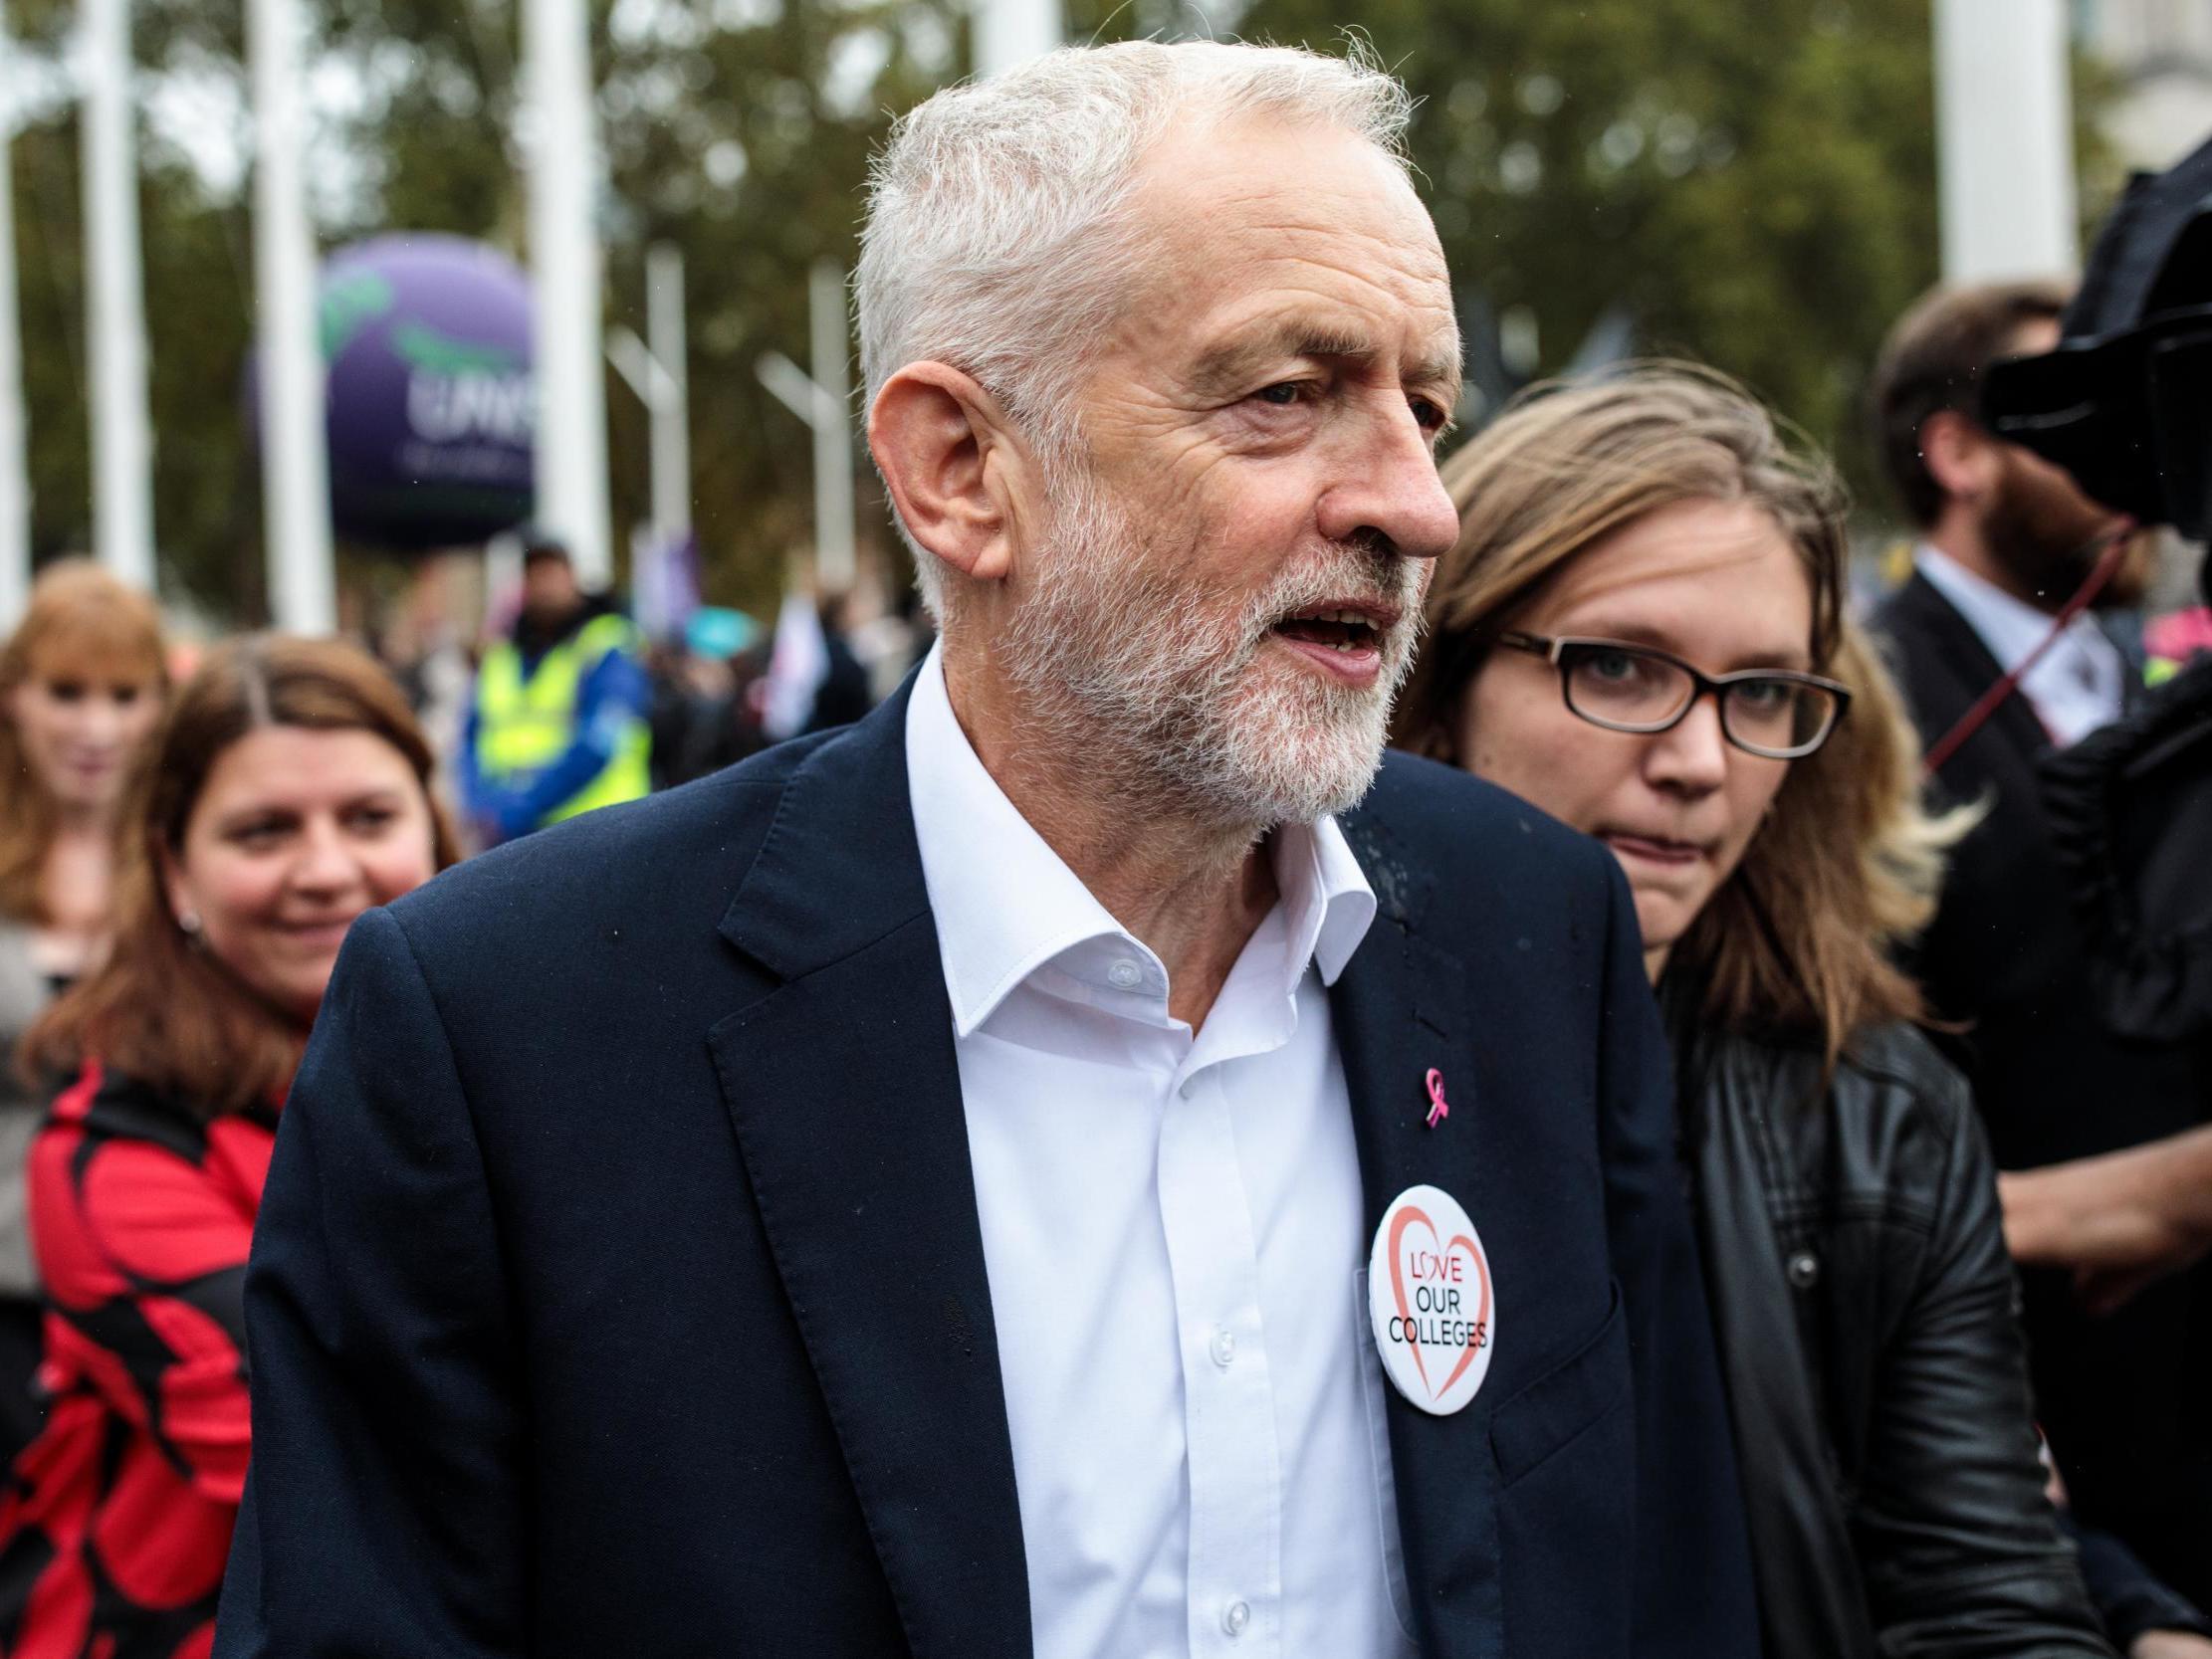 Mr Corbyn will mark Remembrance Sunday by outlining his party’s ‘social contract’ for veterans